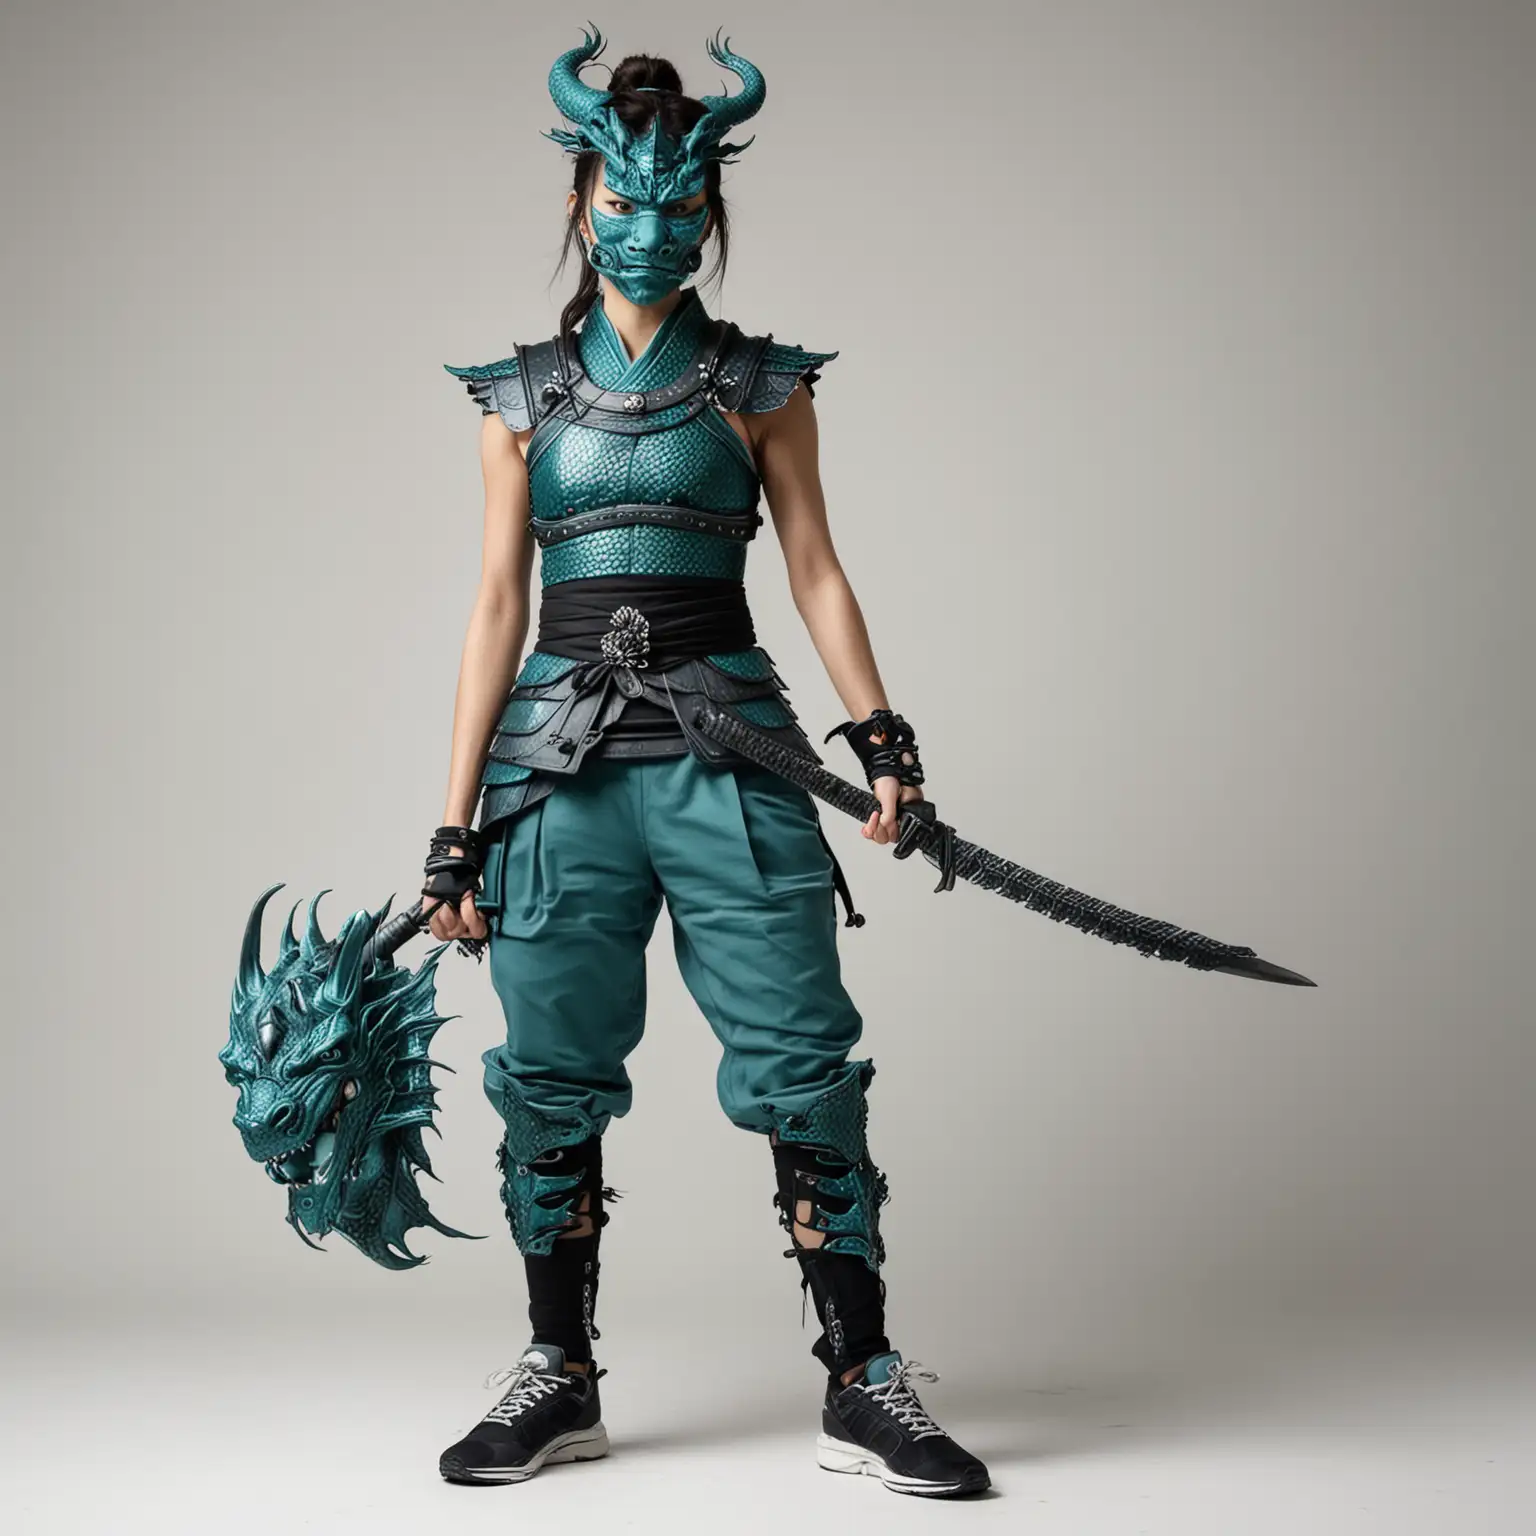 Strong thin beautiful Japanese woman in sleeveless teal dragon-face-samurai armor, black sneakers, white background